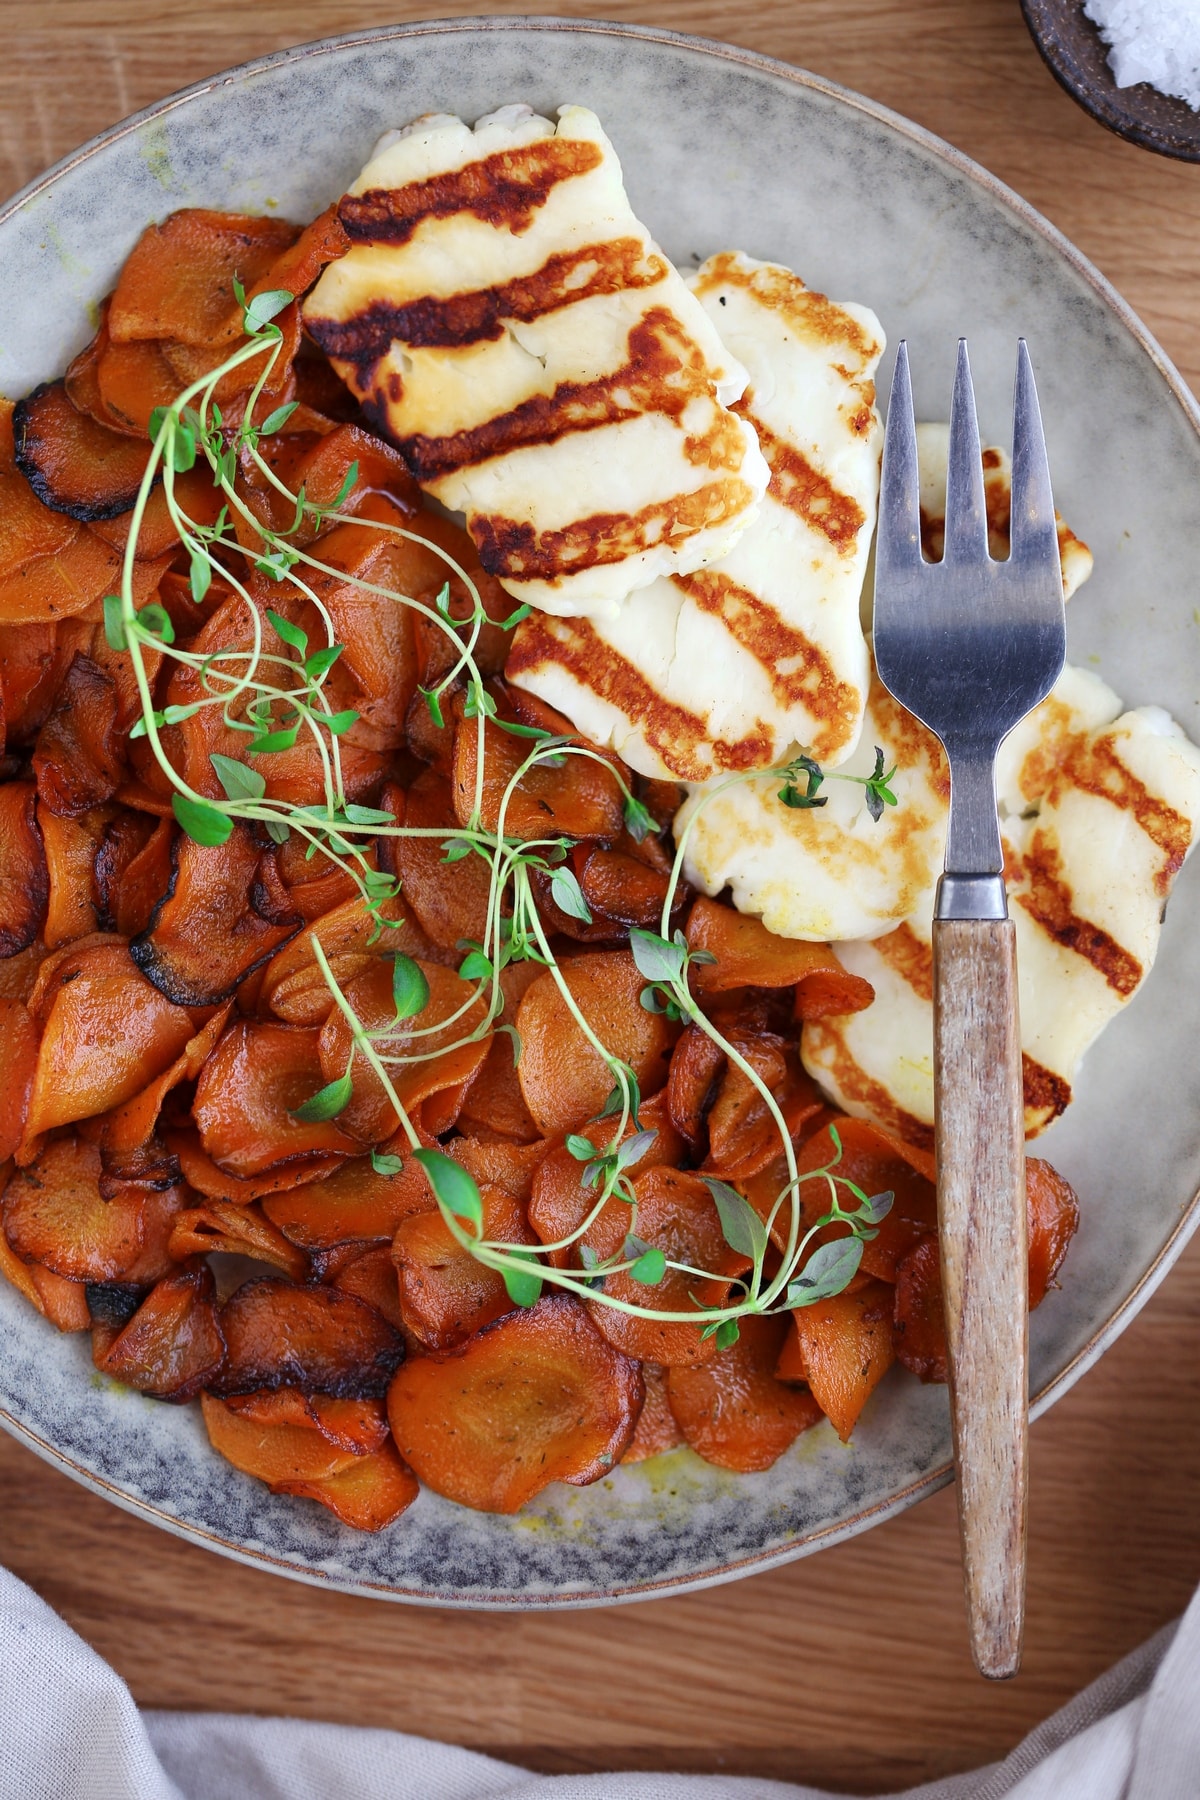 Sauteed carrots served as side dish to grilled halloumi.